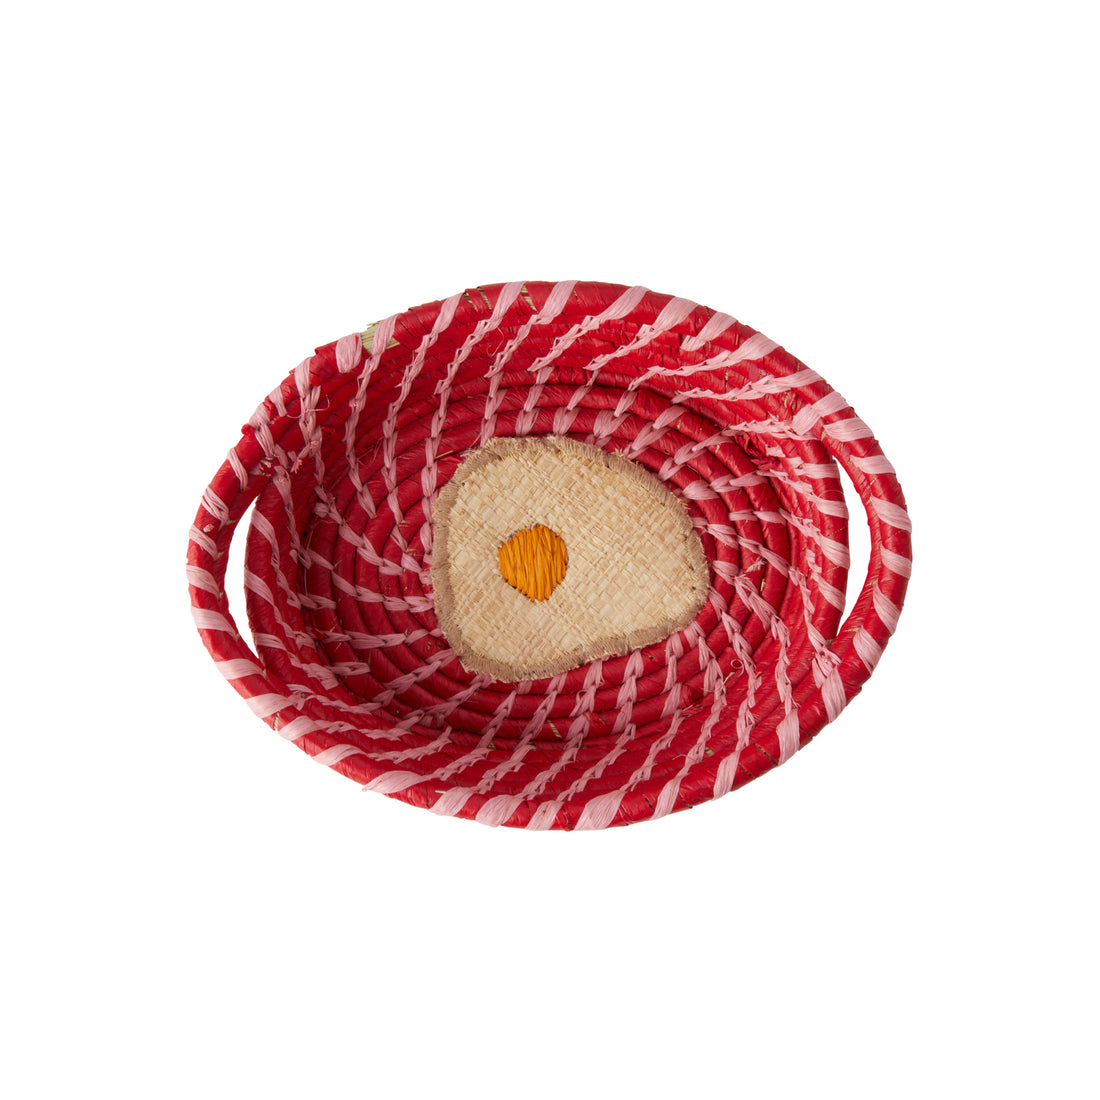 rice-dk-raffia-oval-basket-with-egg-print-red-rice-bsbre-miovparxcr-